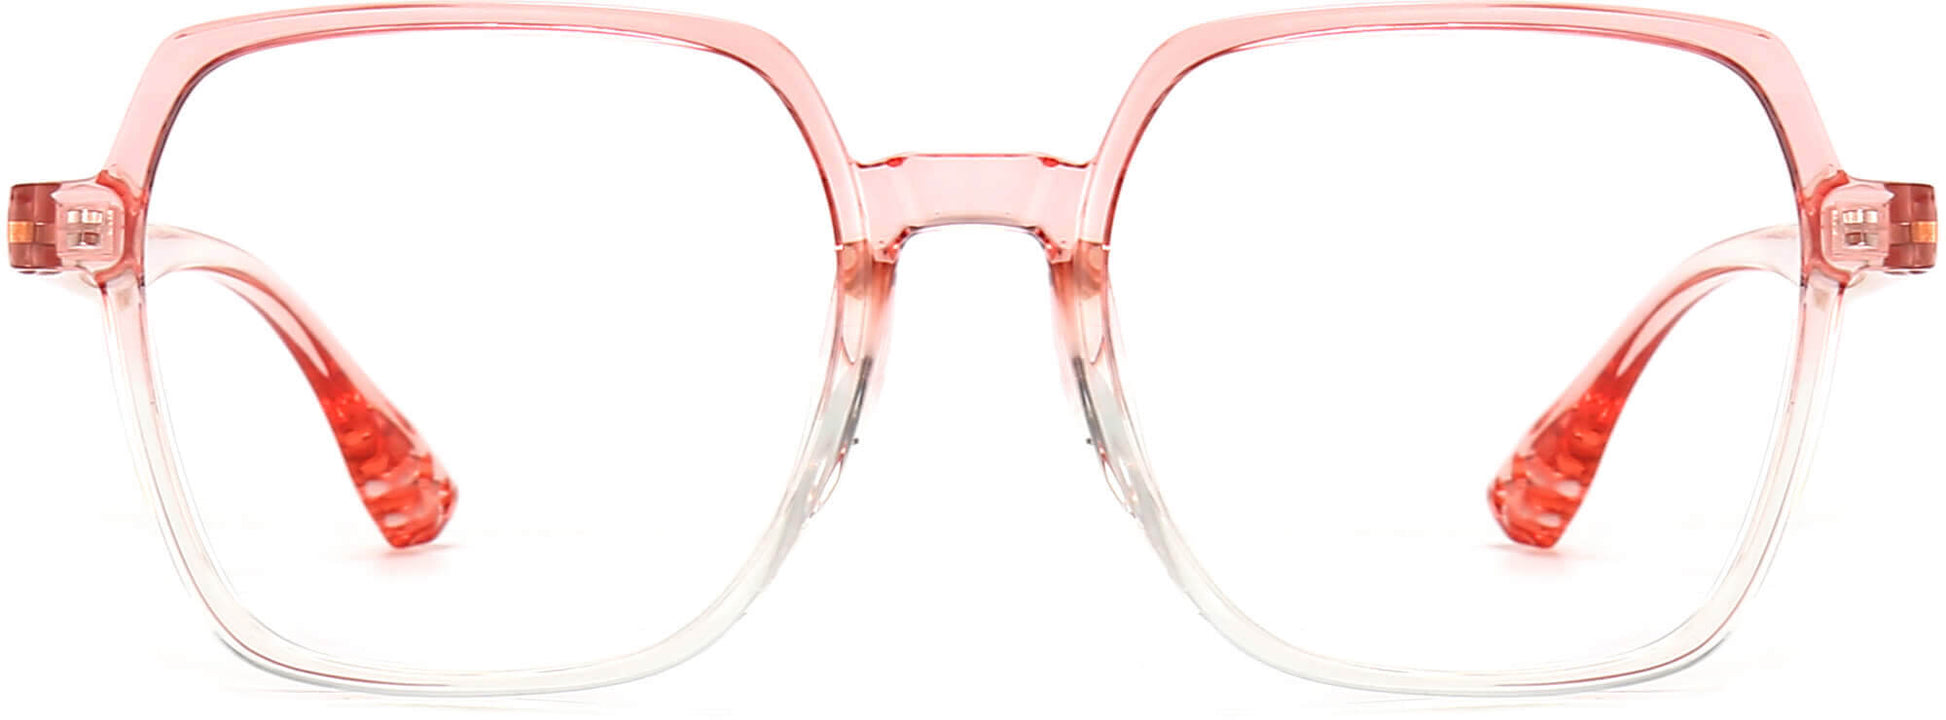 Presley Square Pink Eyeglasses from ANRRI, front view